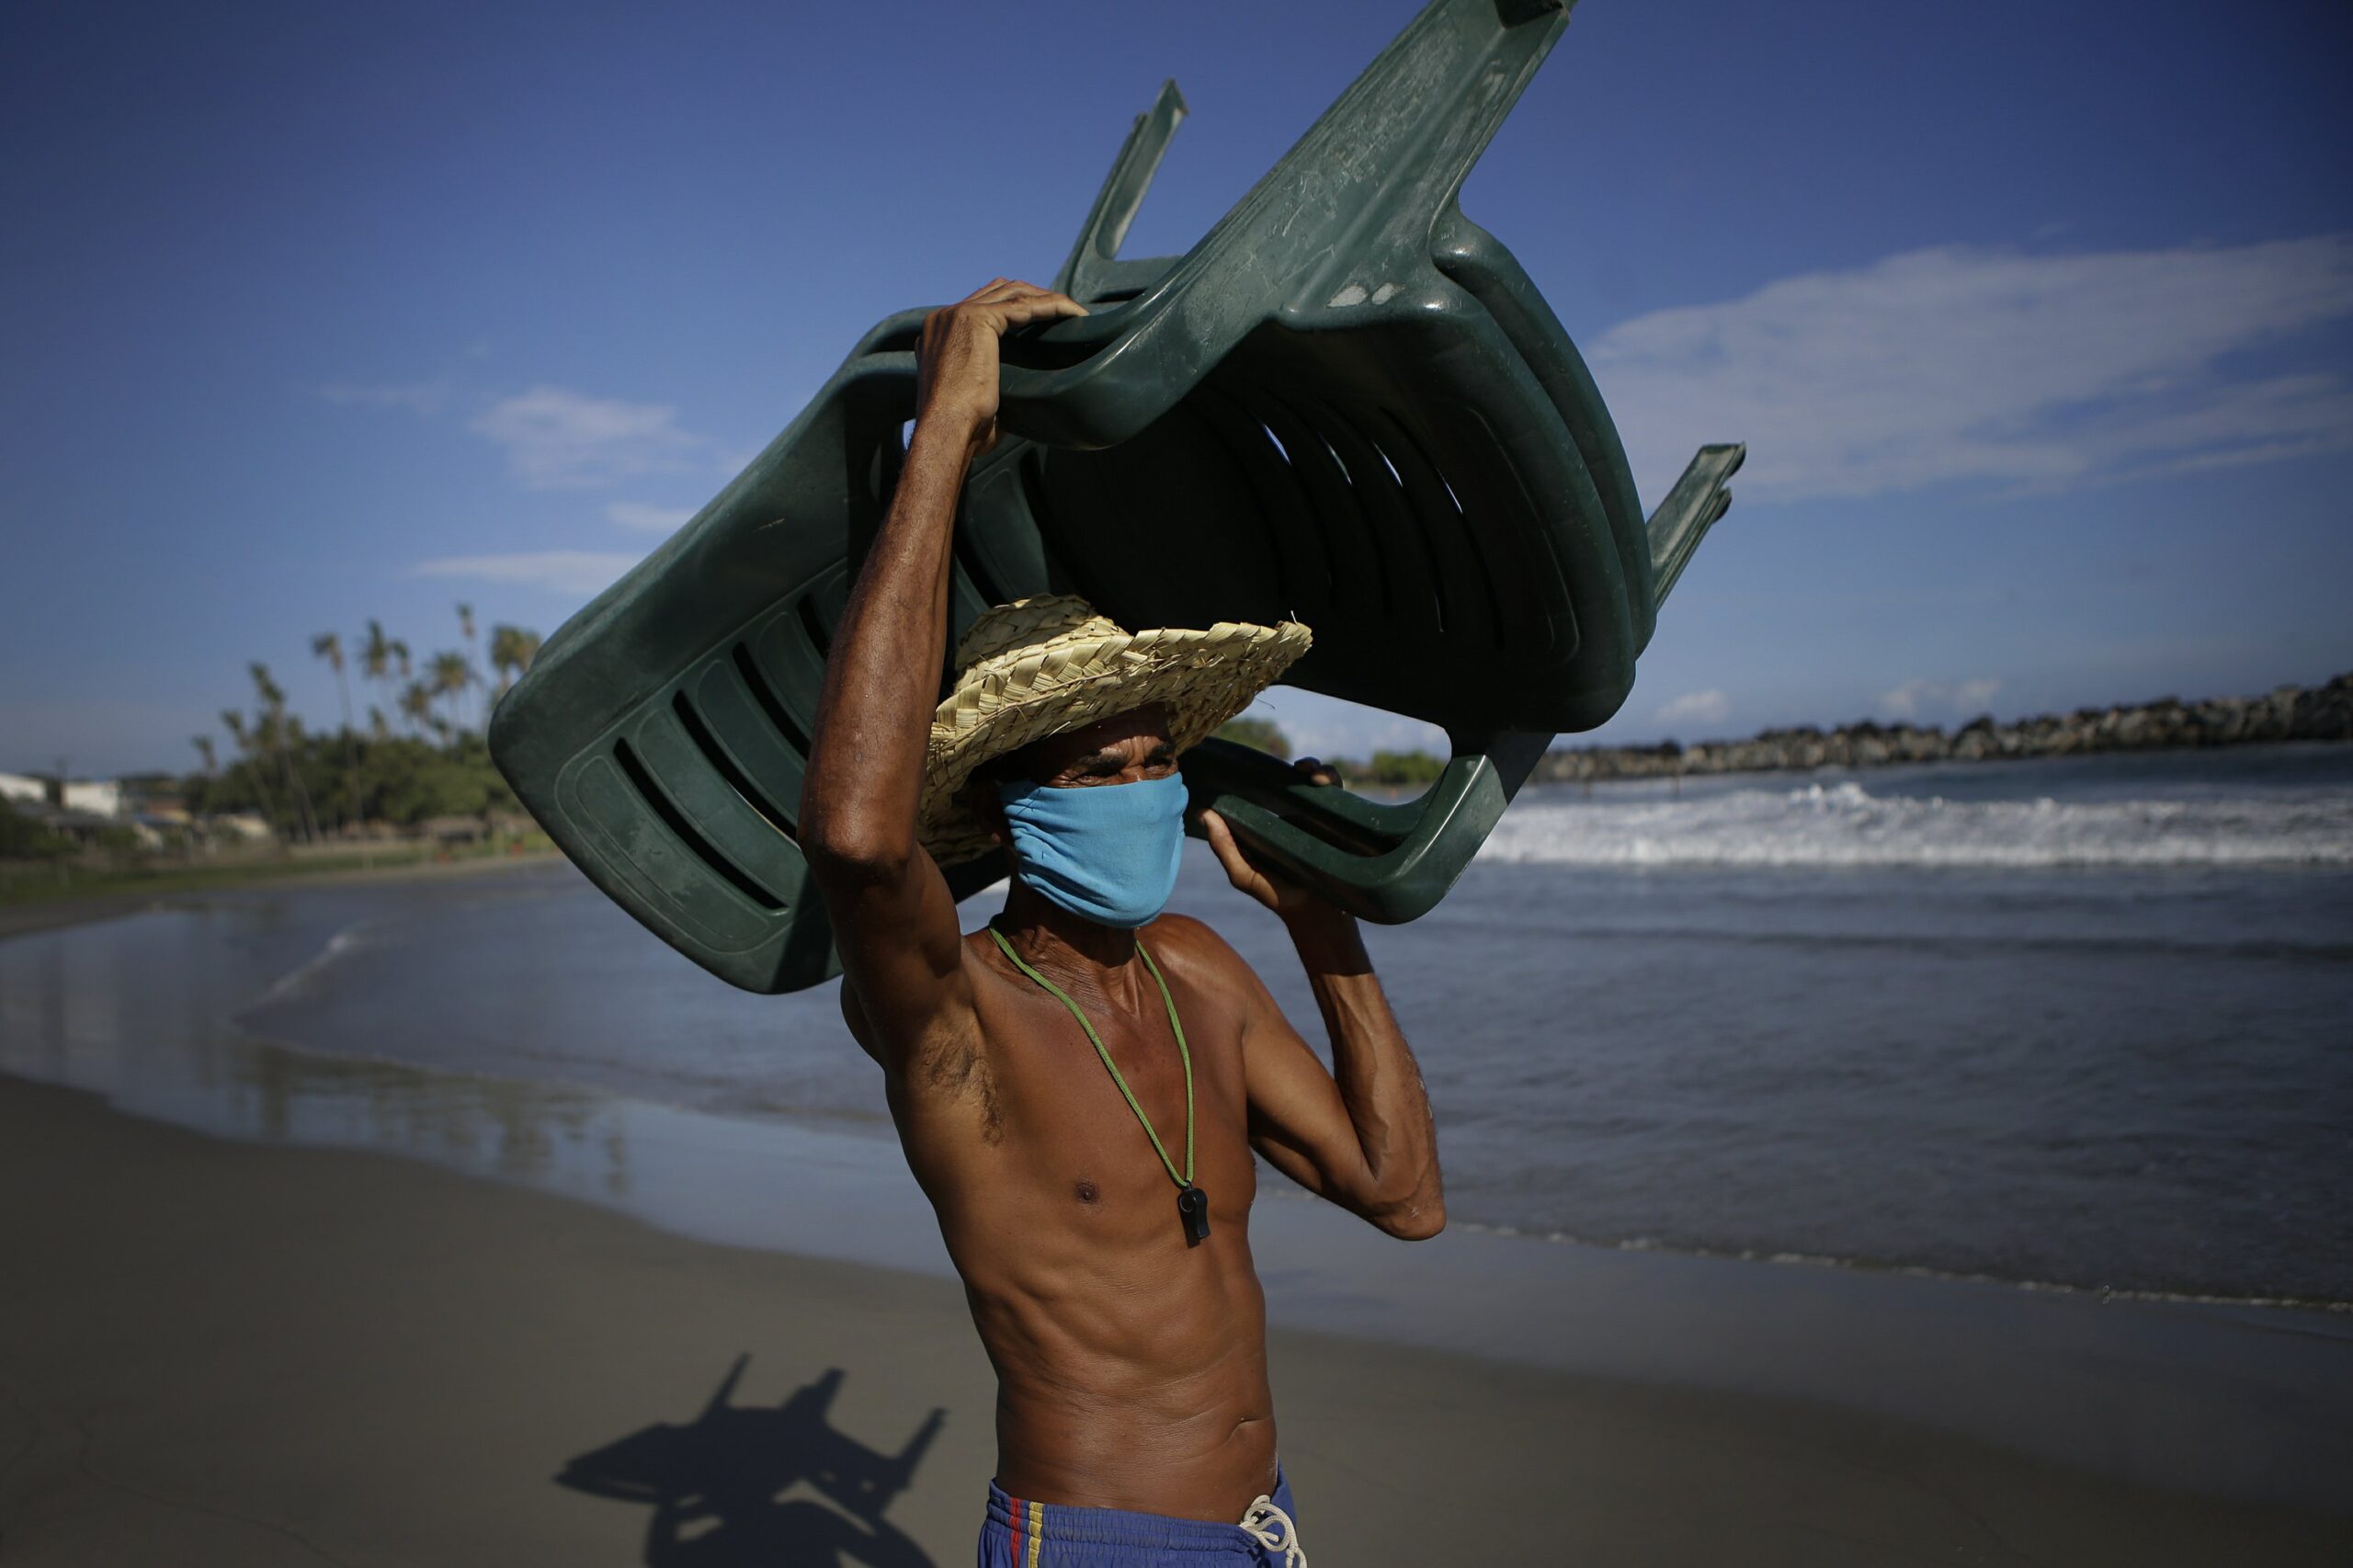 After 7 months, it’s back to the beach for some Venezuelans